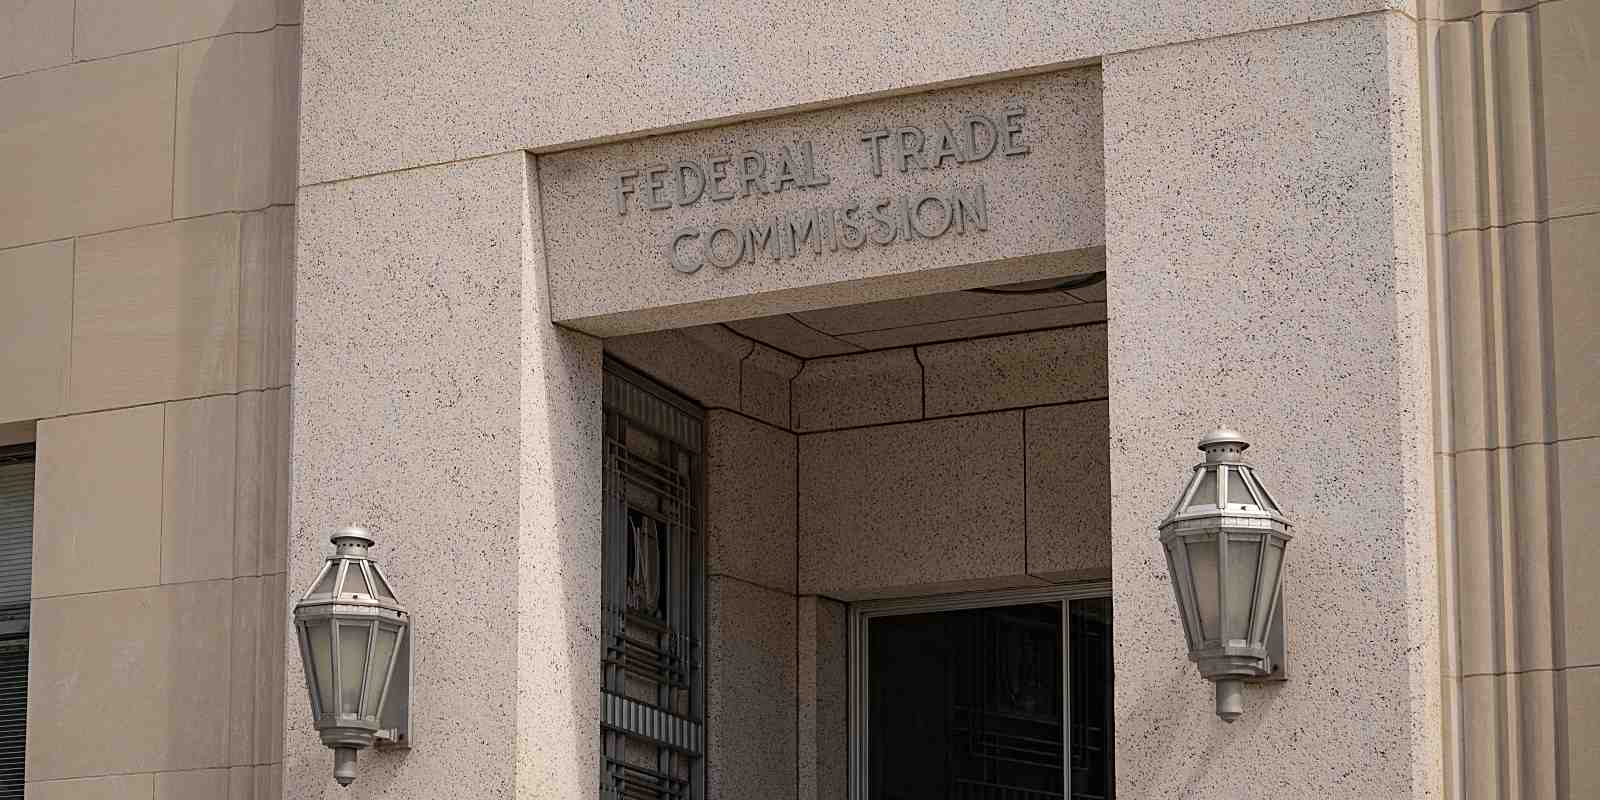 federal trade commission close up of building sign